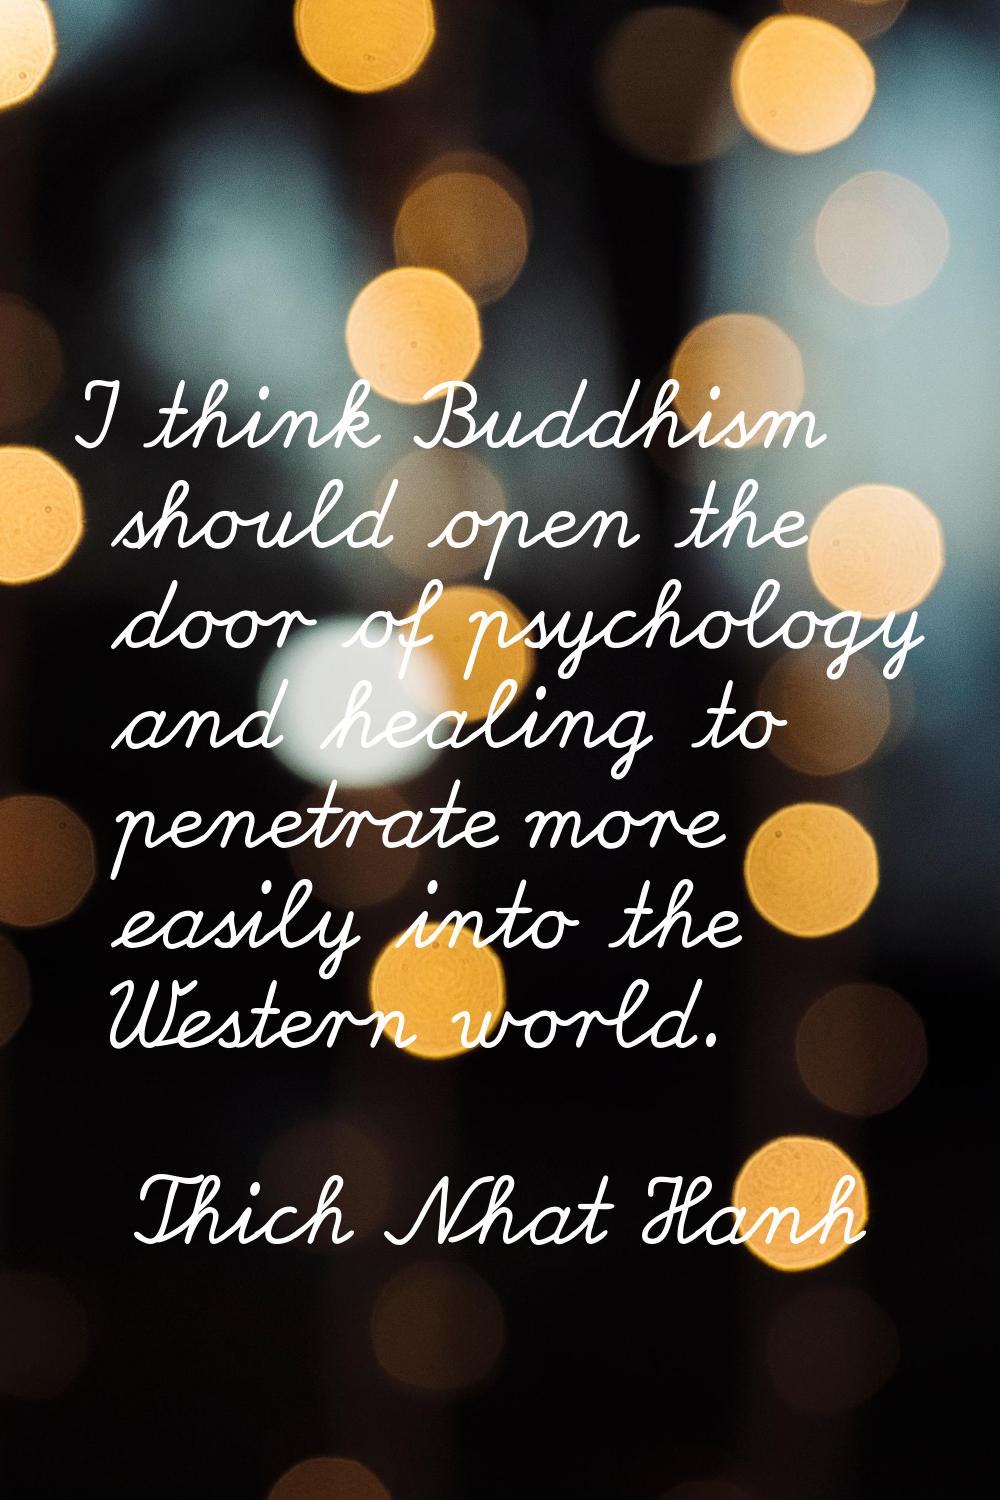 I think Buddhism should open the door of psychology and healing to penetrate more easily into the W